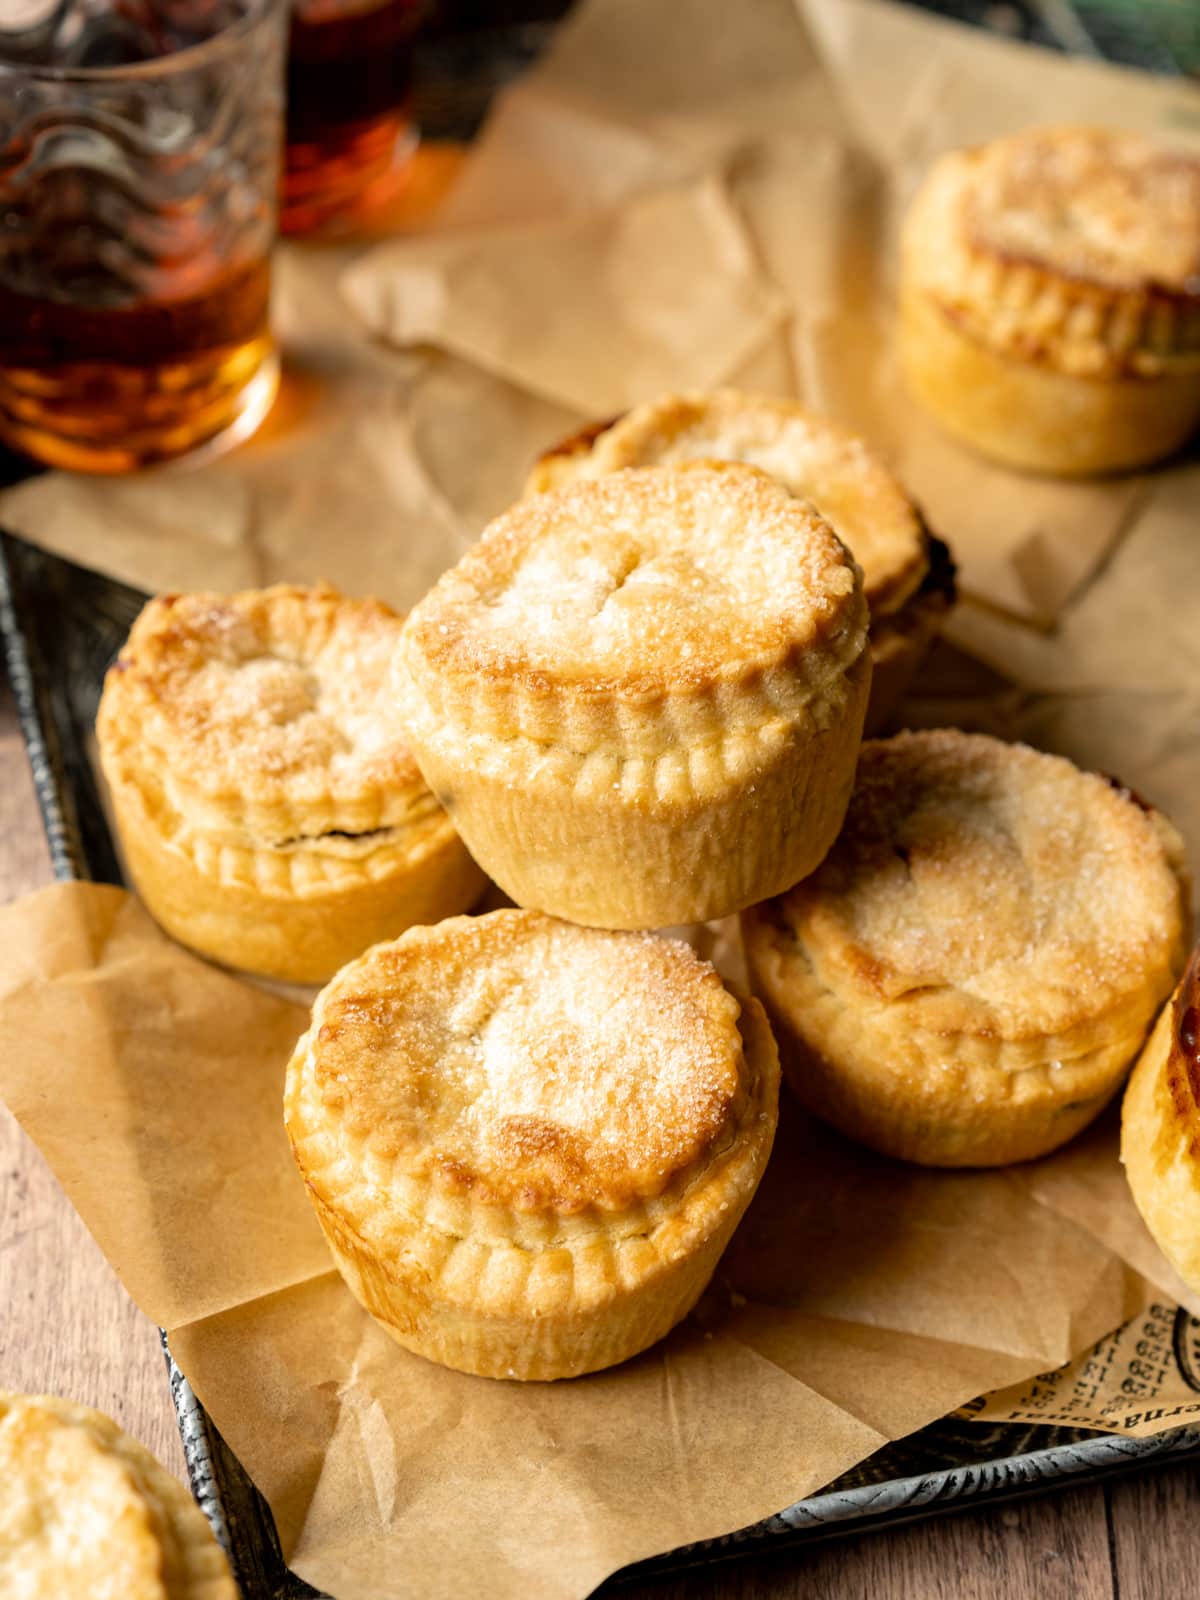 mince pies on a tray with a sheet of paper and 2 glasses of brandy in the background.